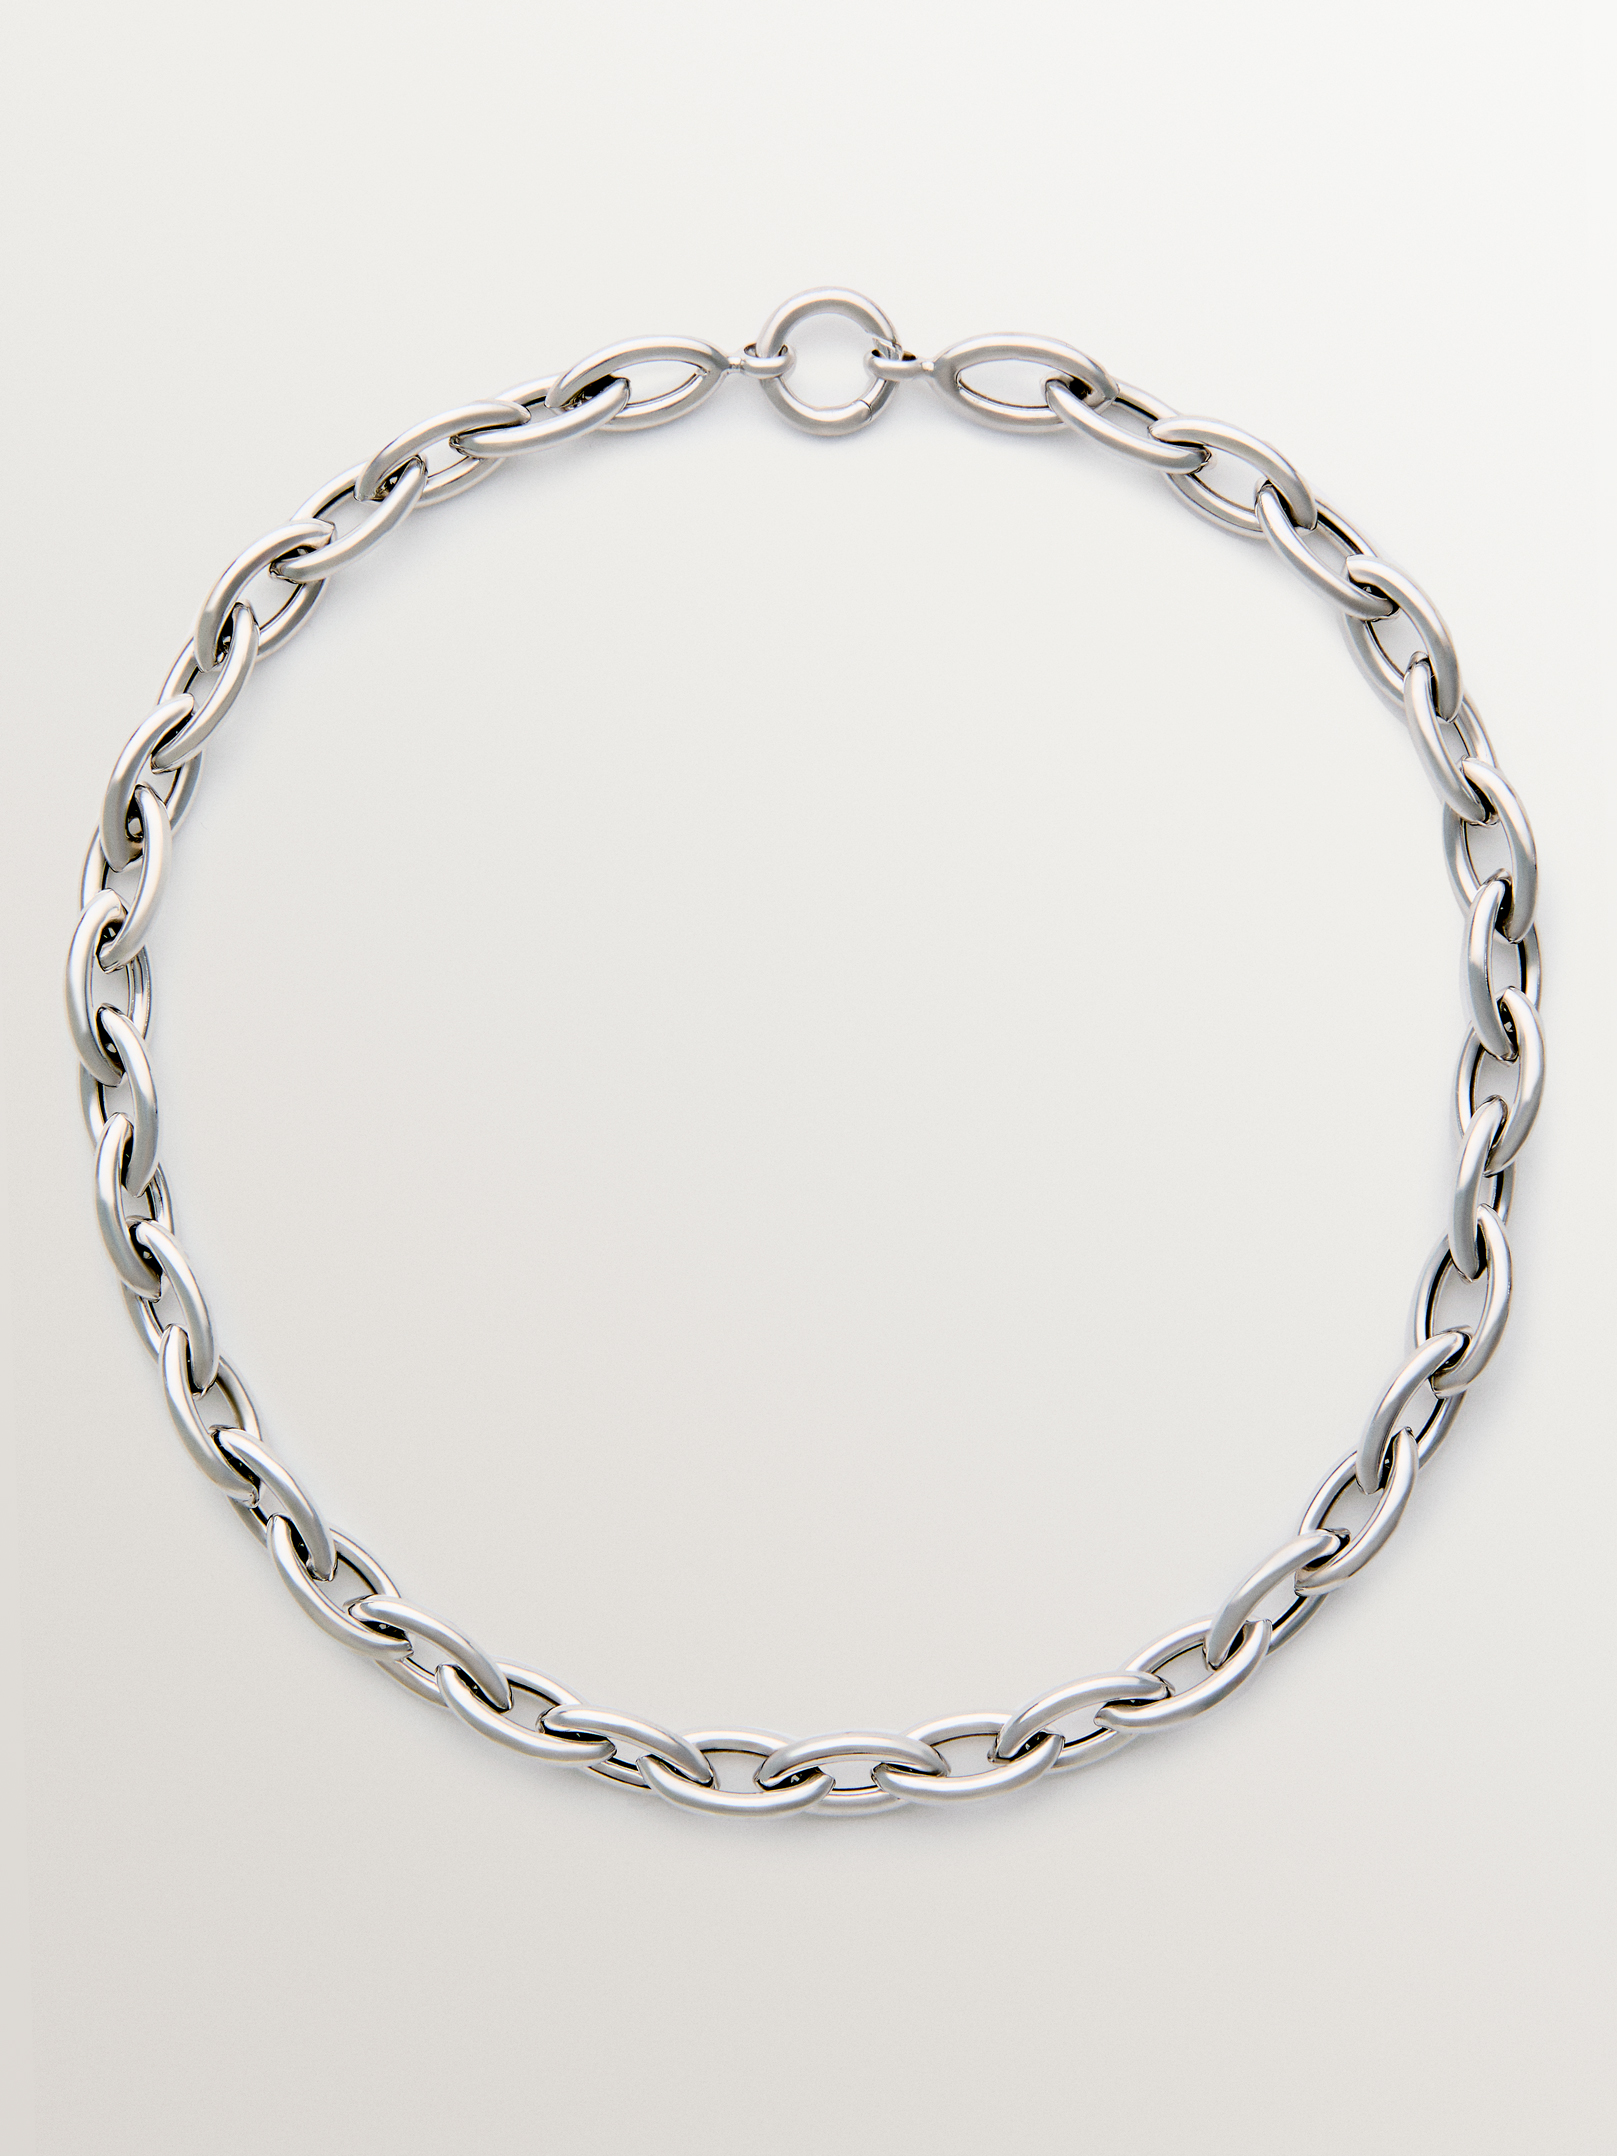 925 silver chain with oval links